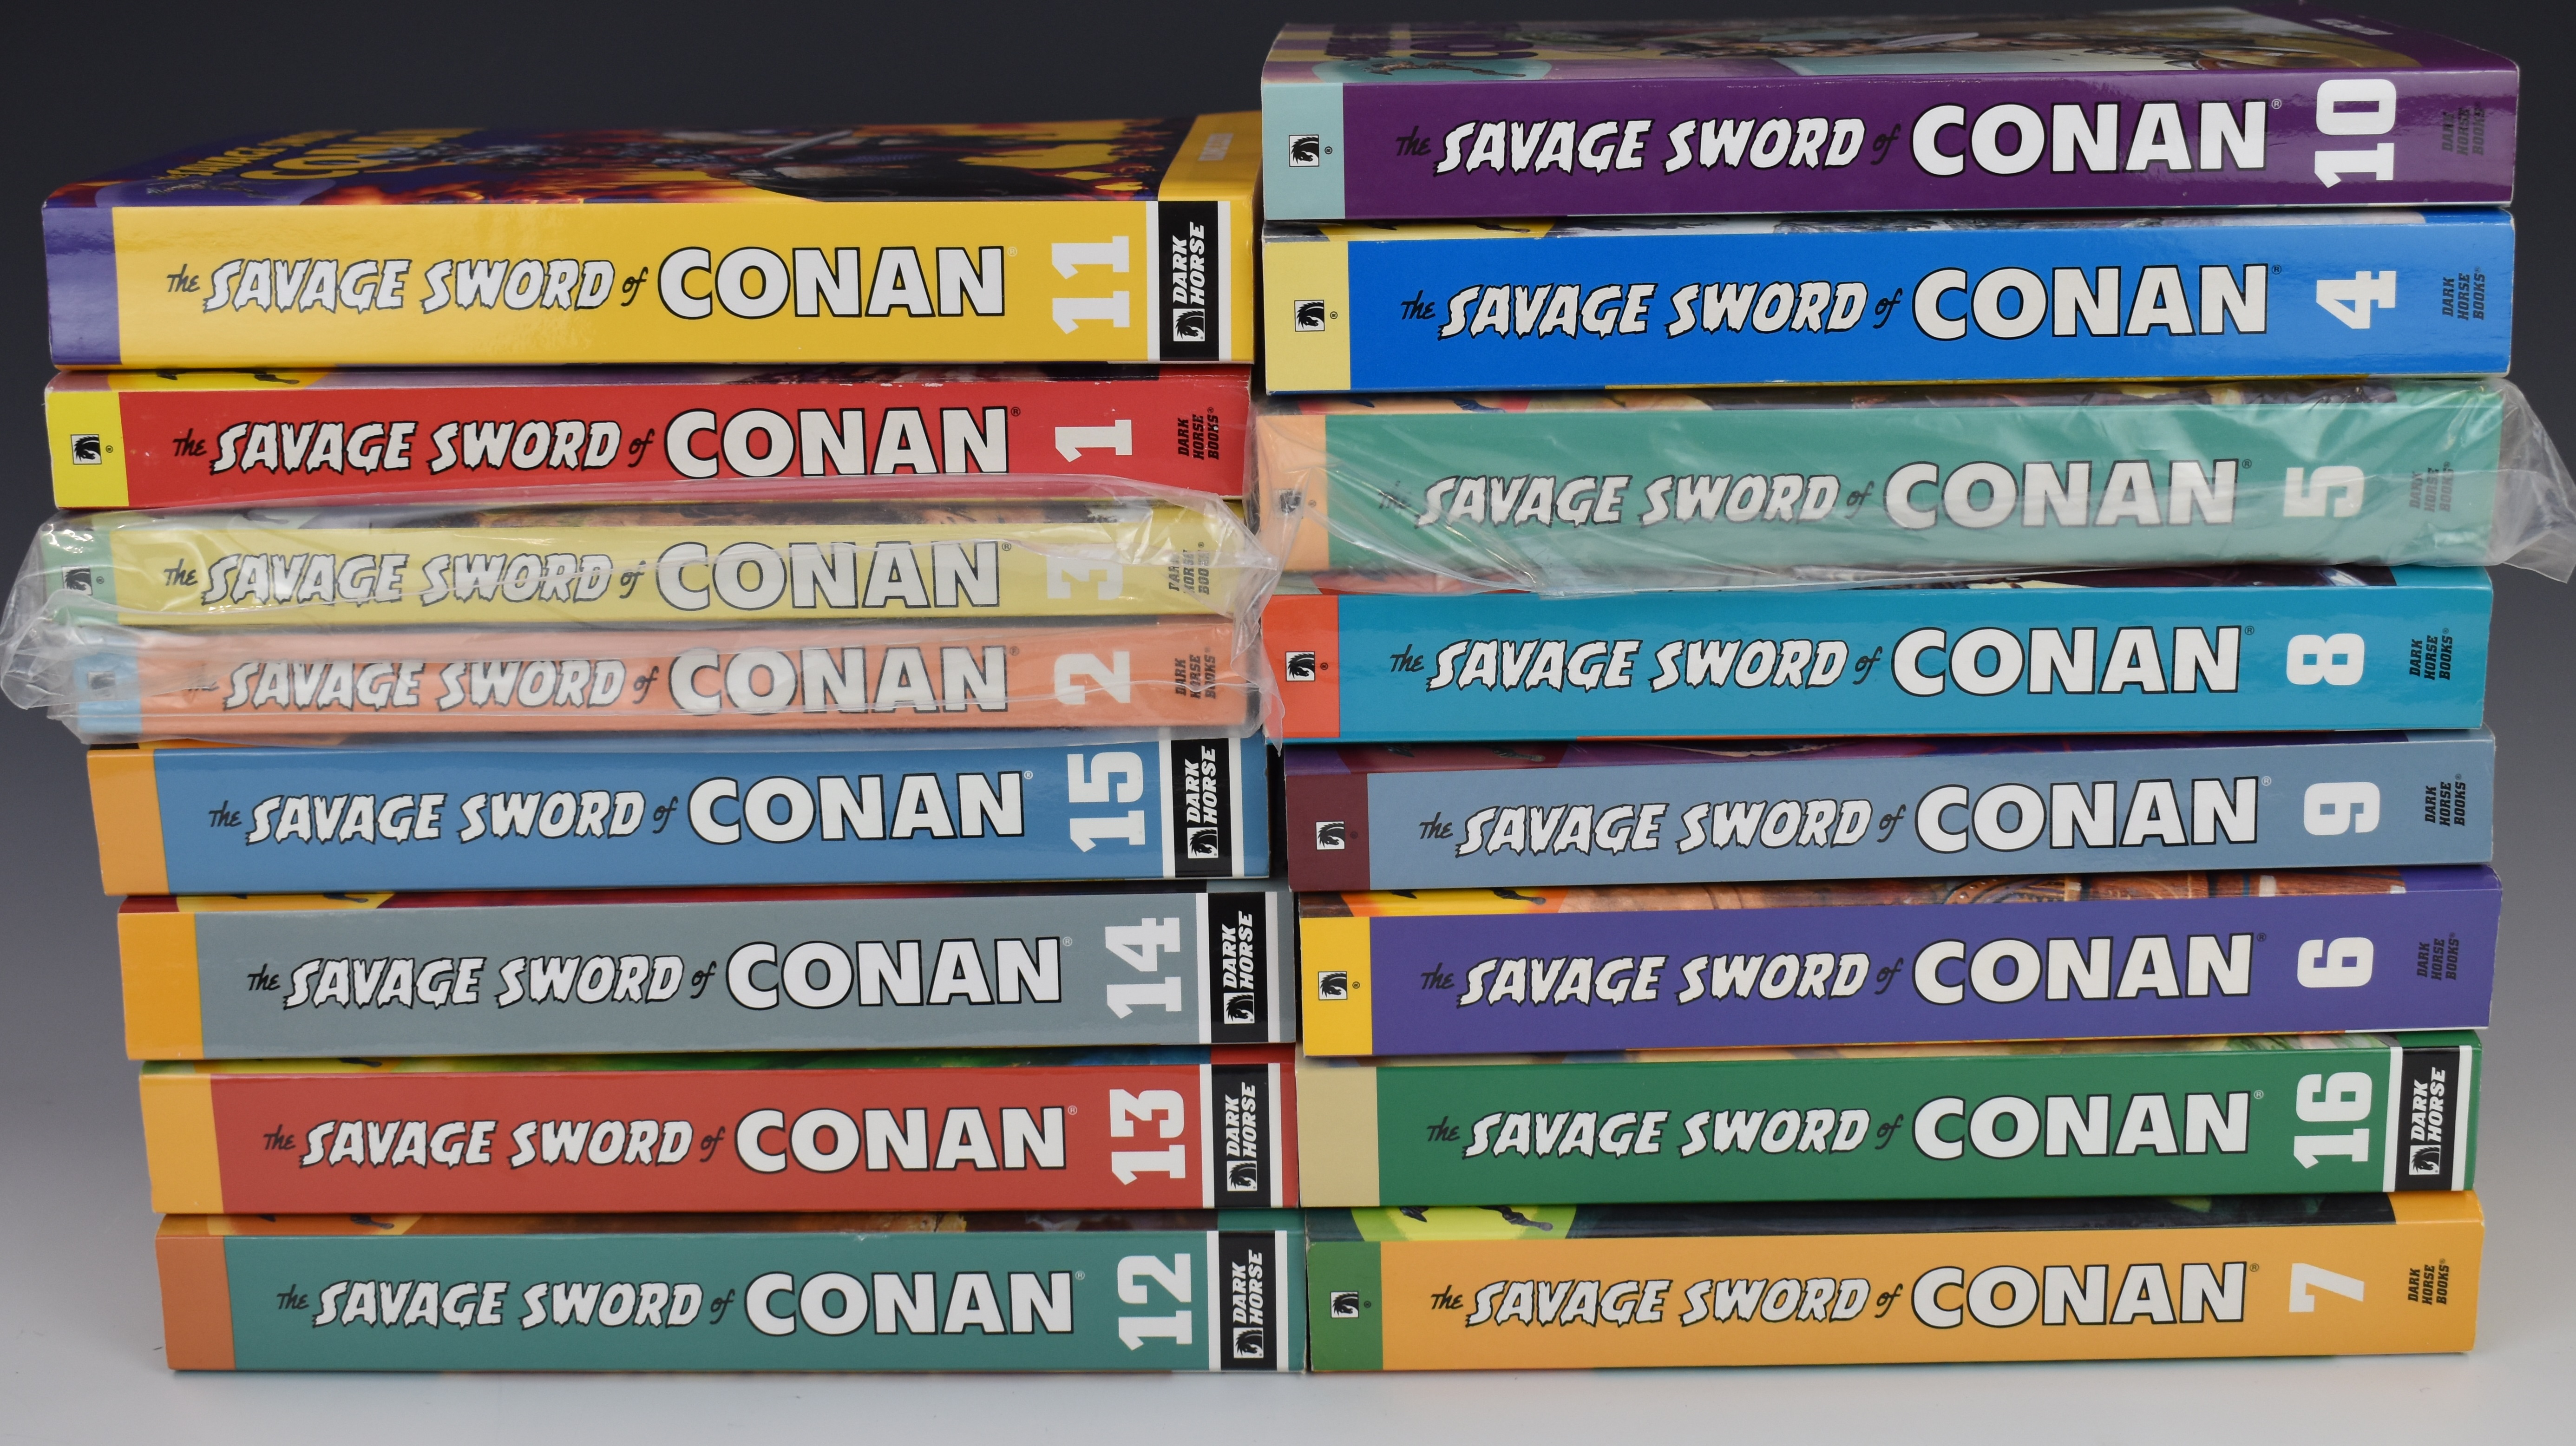 The Savage Sword of Conan volumes 1-16 by Dark Horse Books.